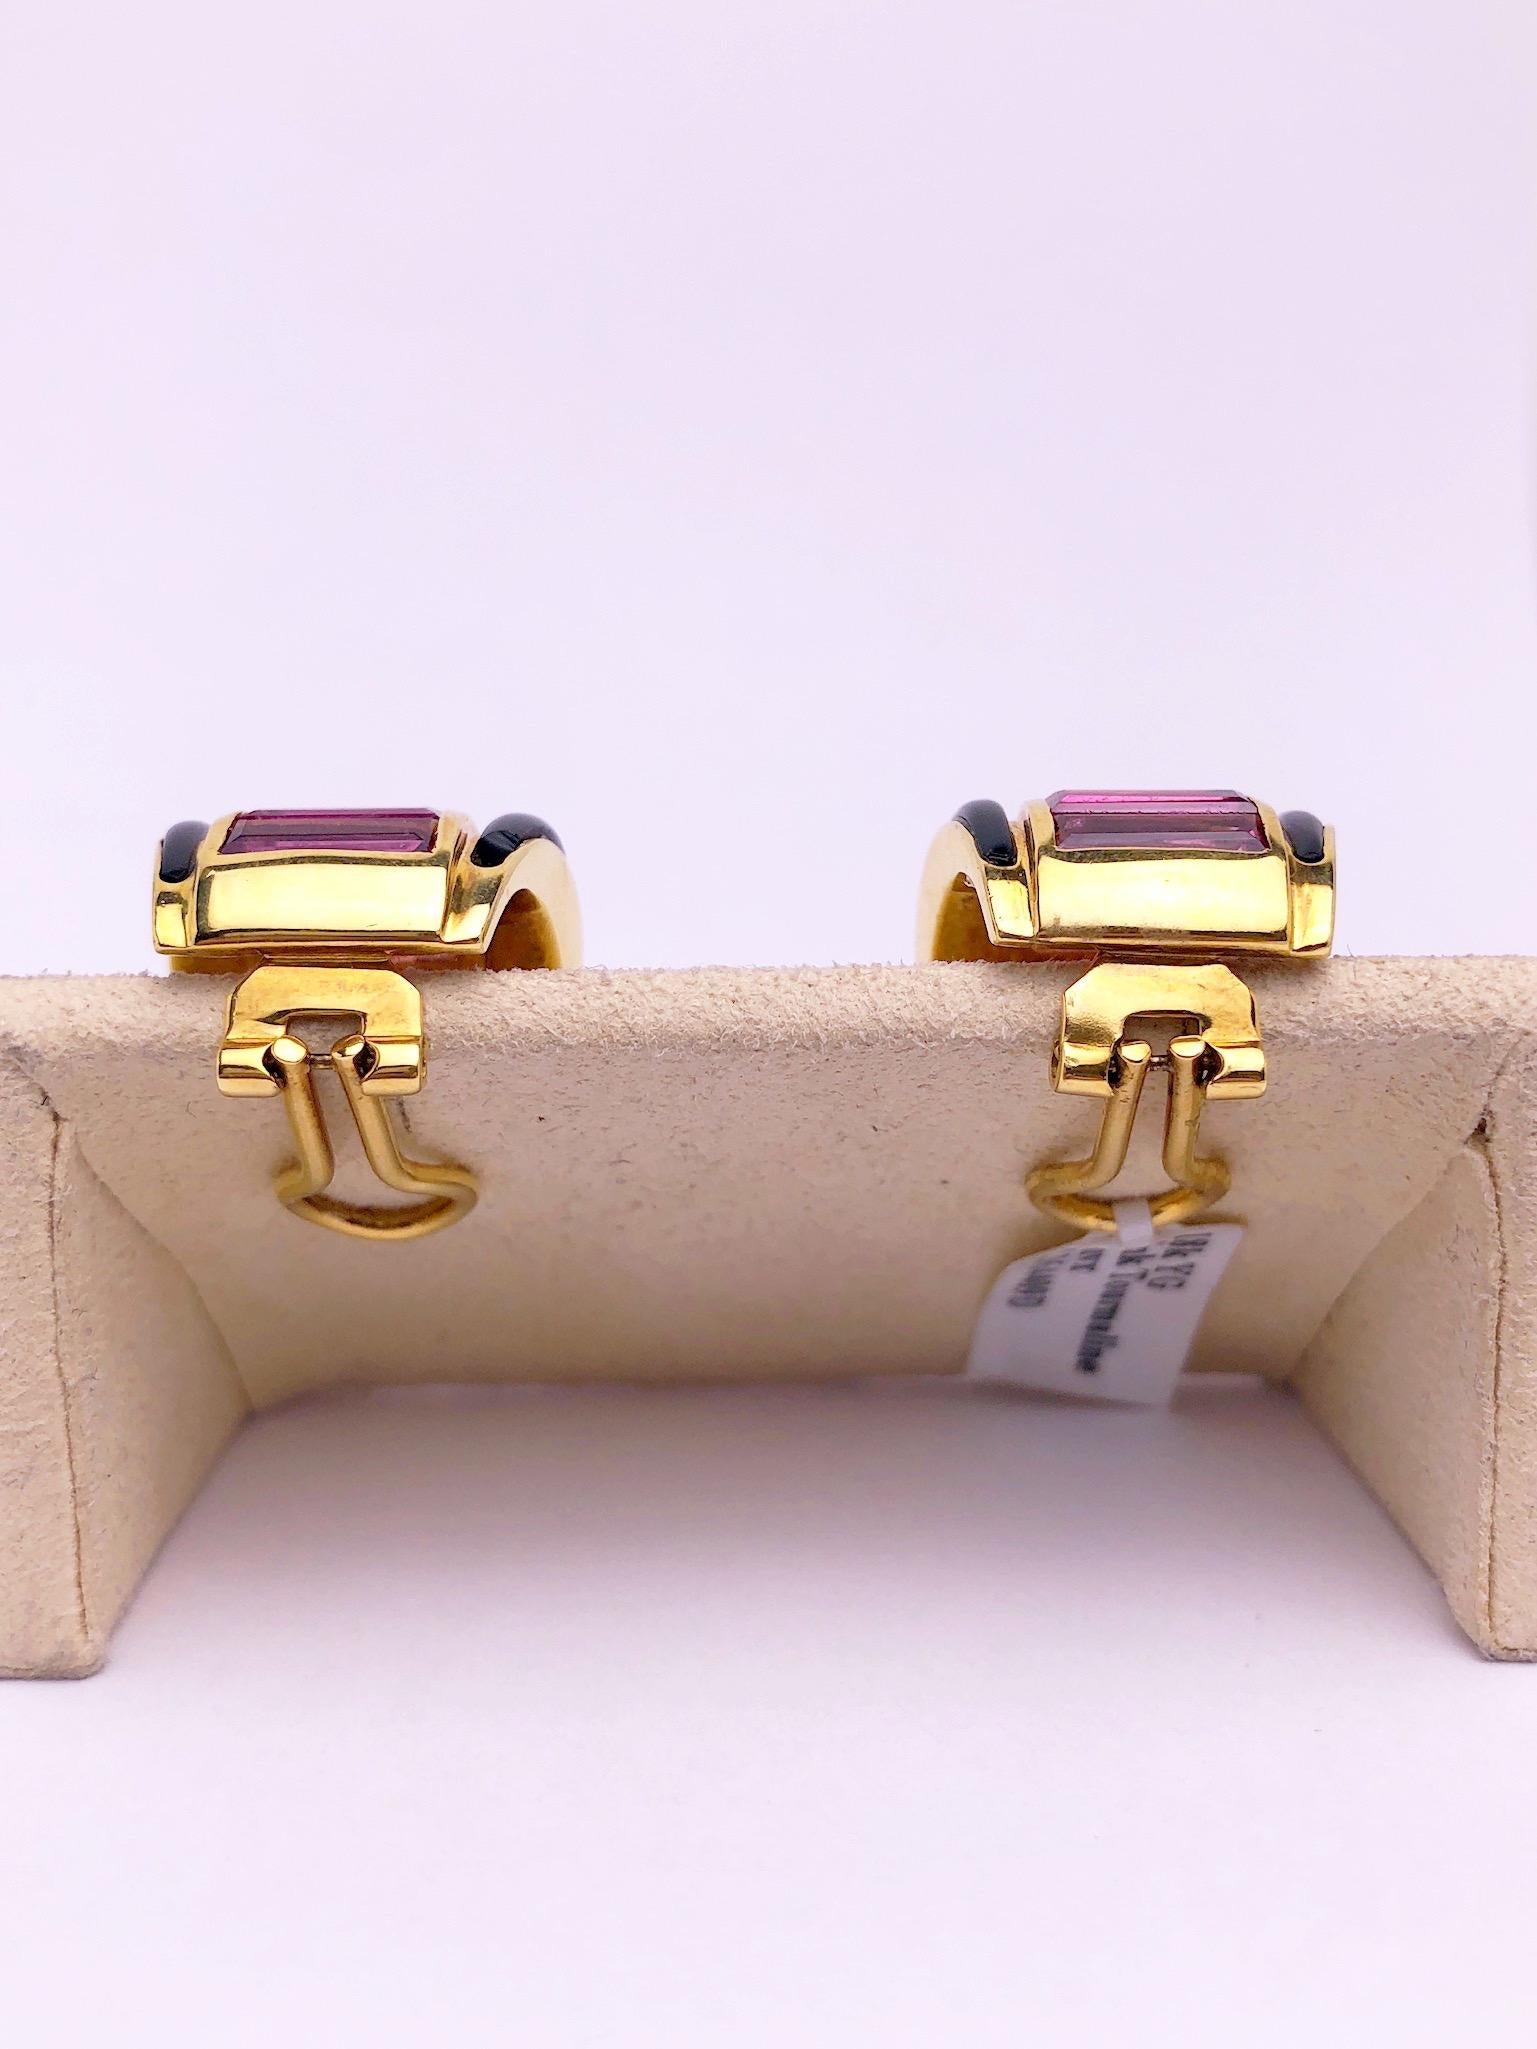 These 18 karat yellow gold earrings are designed with a row of Baguette Cut Pink Tourmaline stones set down the center with Black Onyx borders. The earrings measure approximately 3/4